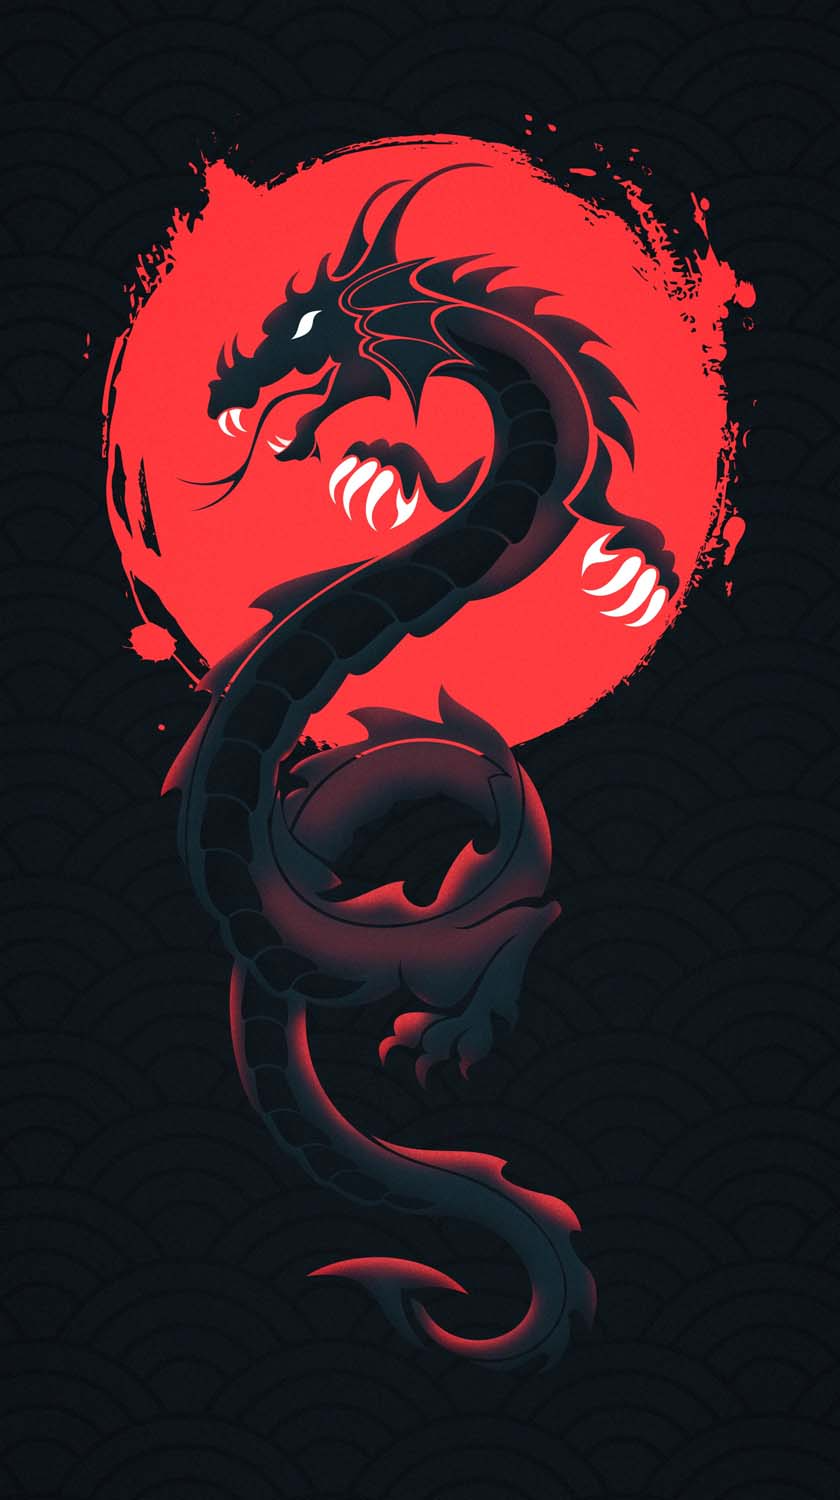 Hail Hydra IPhone Wallpaper HD  IPhone Wallpapers